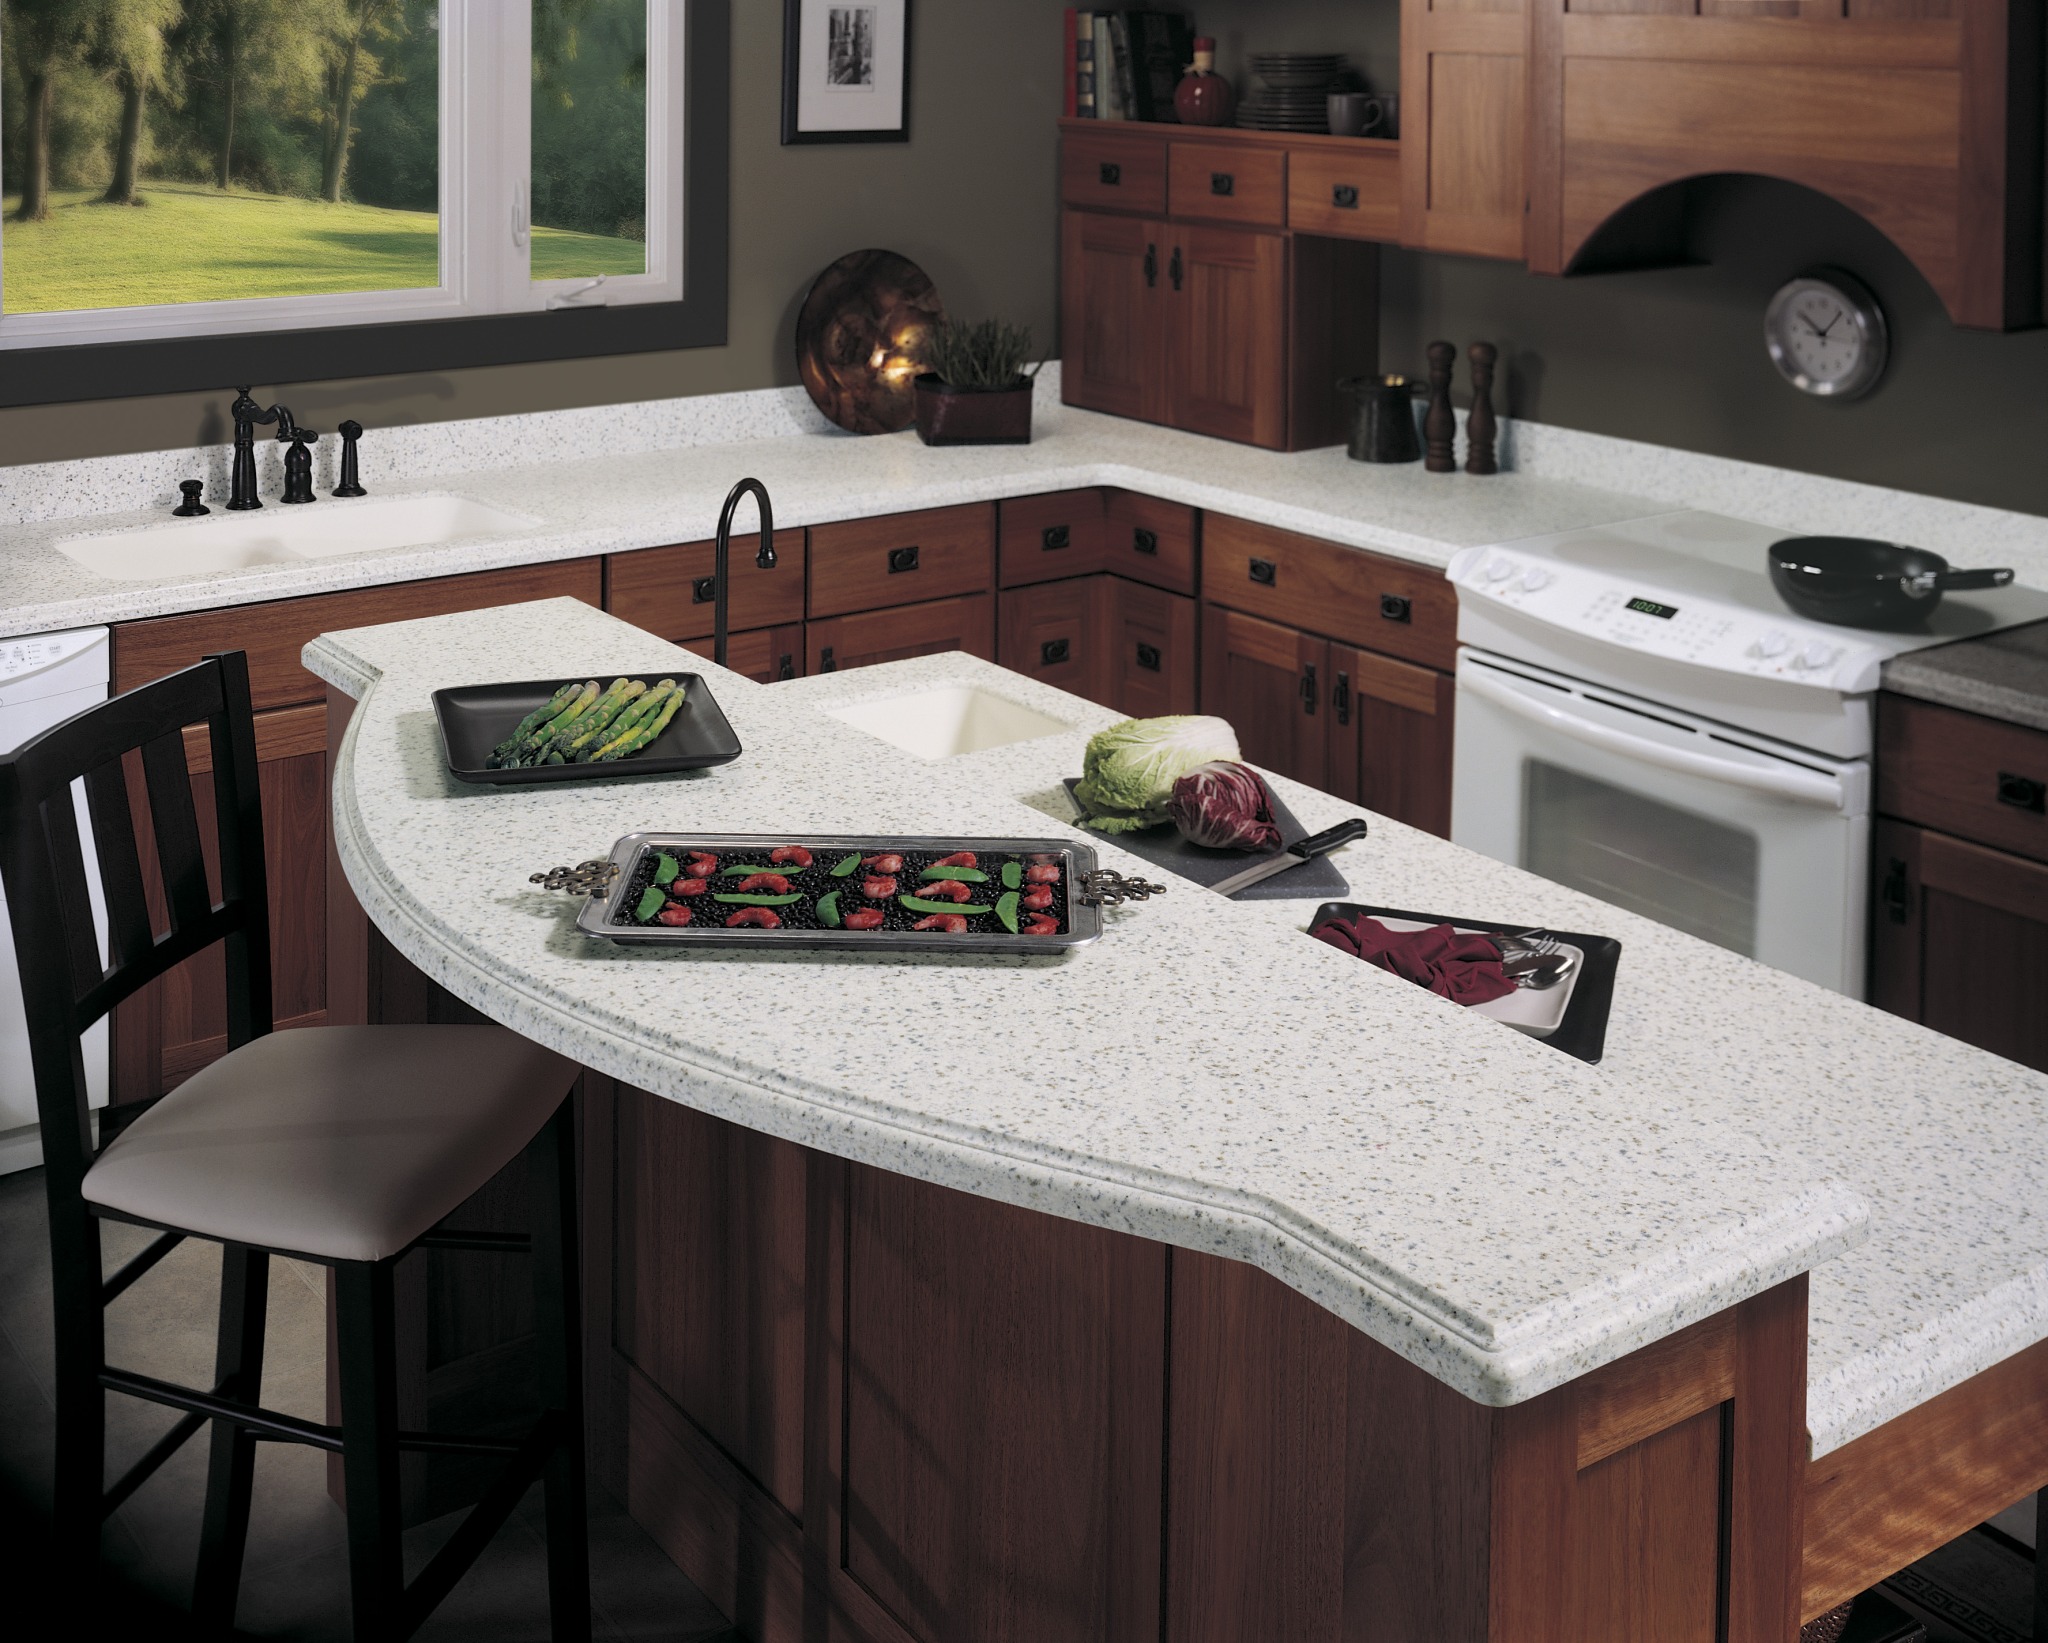 Which Stone is Best for Your Kitchen Island Countertop? R&D Marble, Conroe, TX